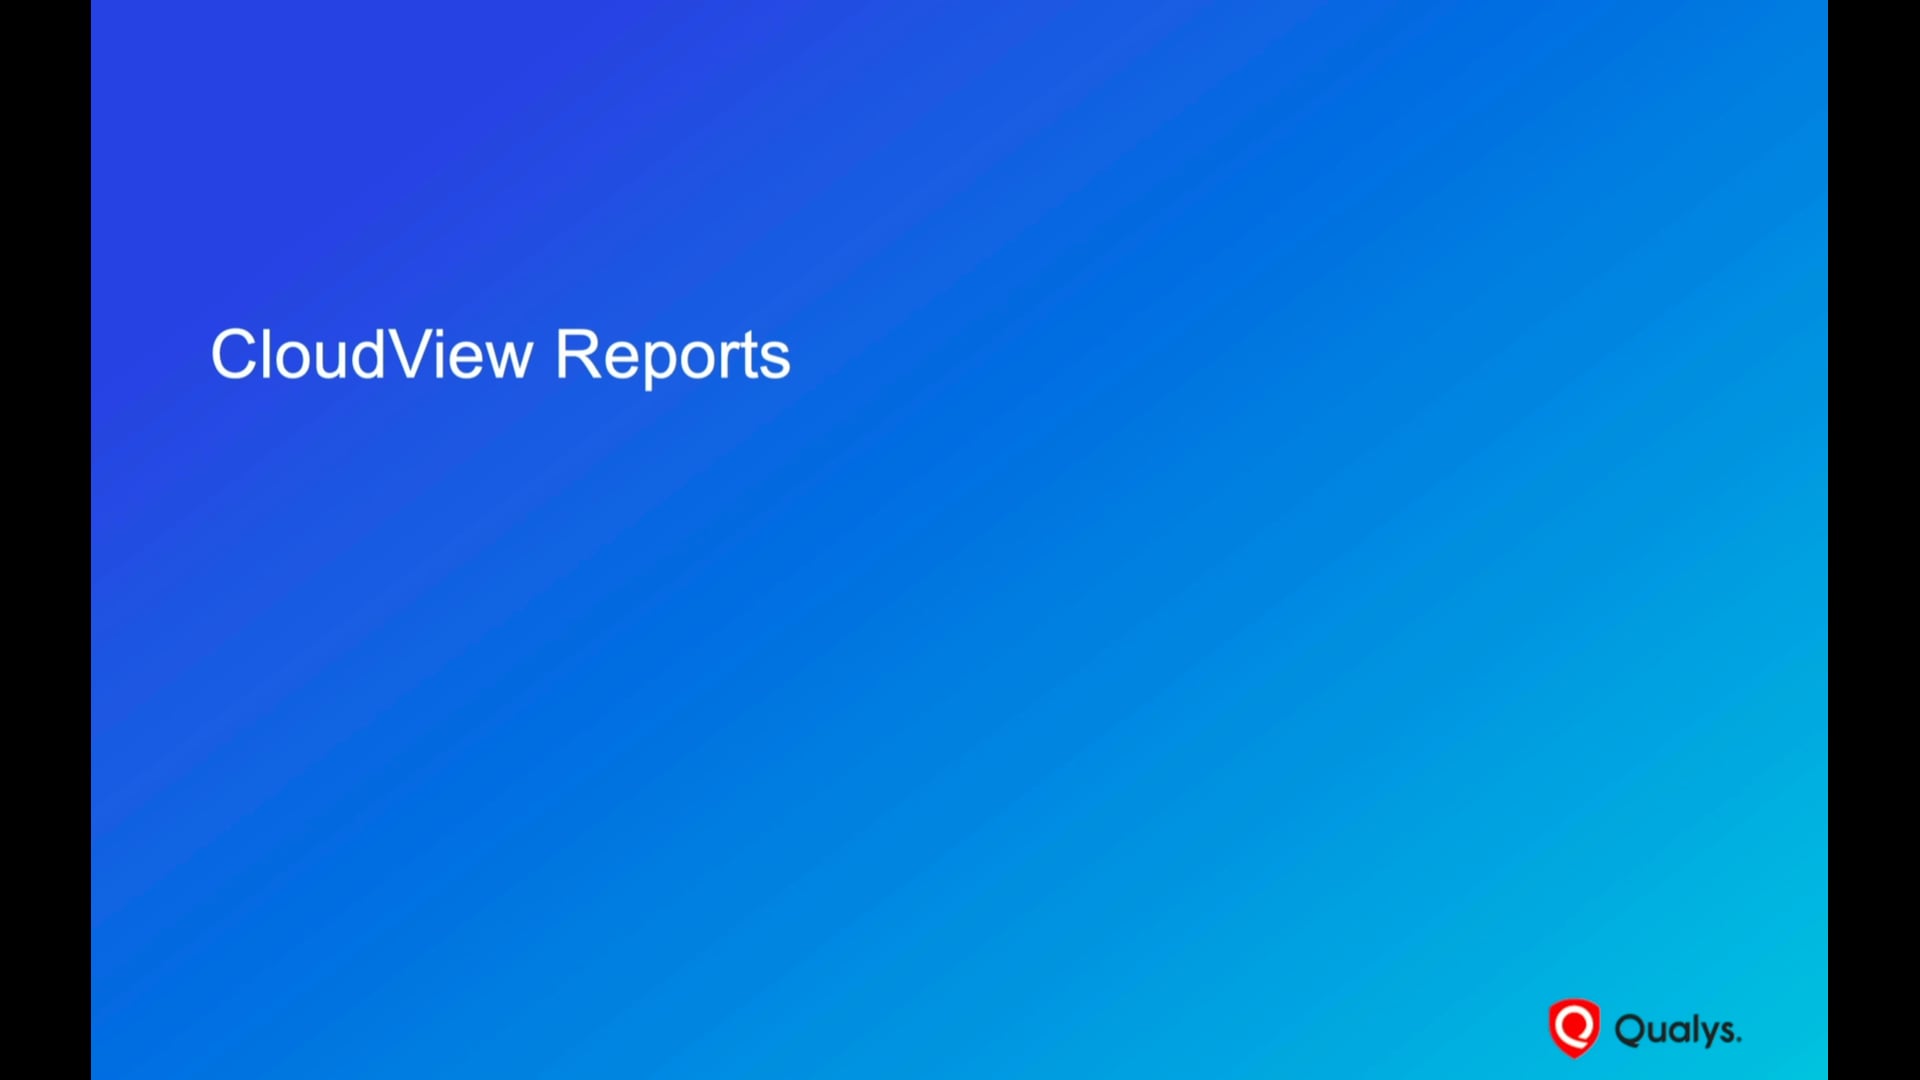 CloudView Reports